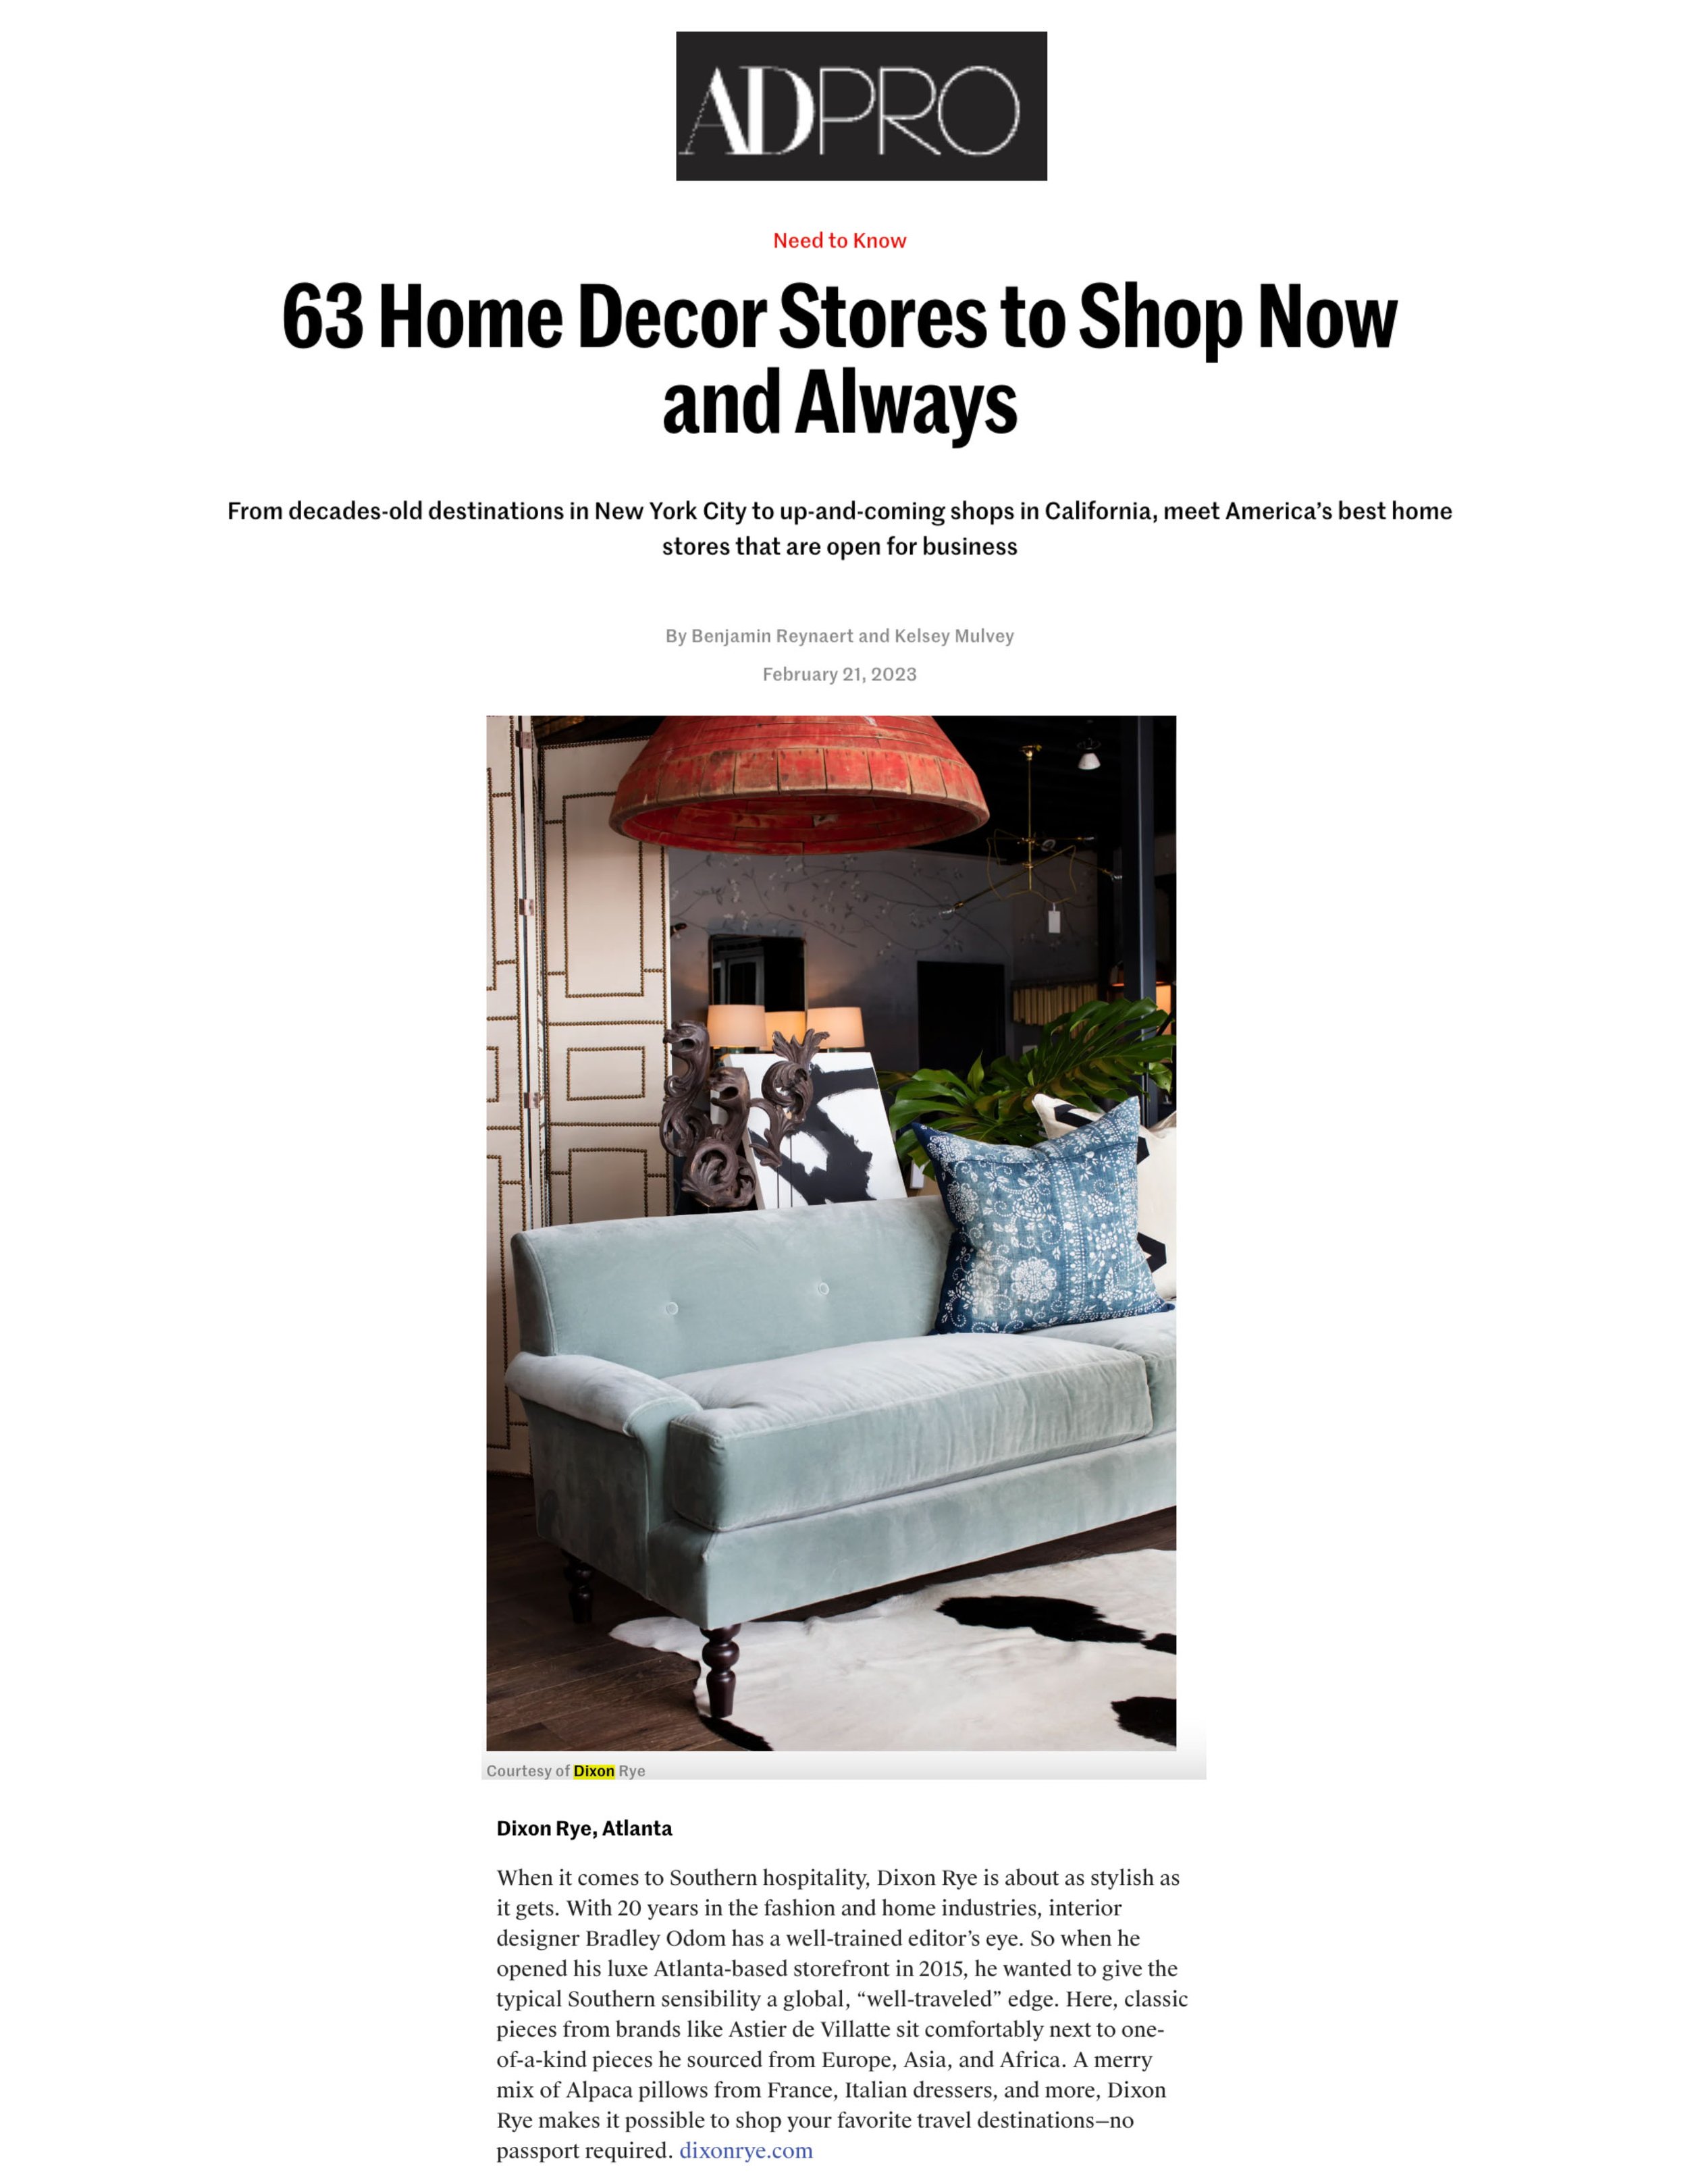 63 Home Decor Stores to Shop Now and Always